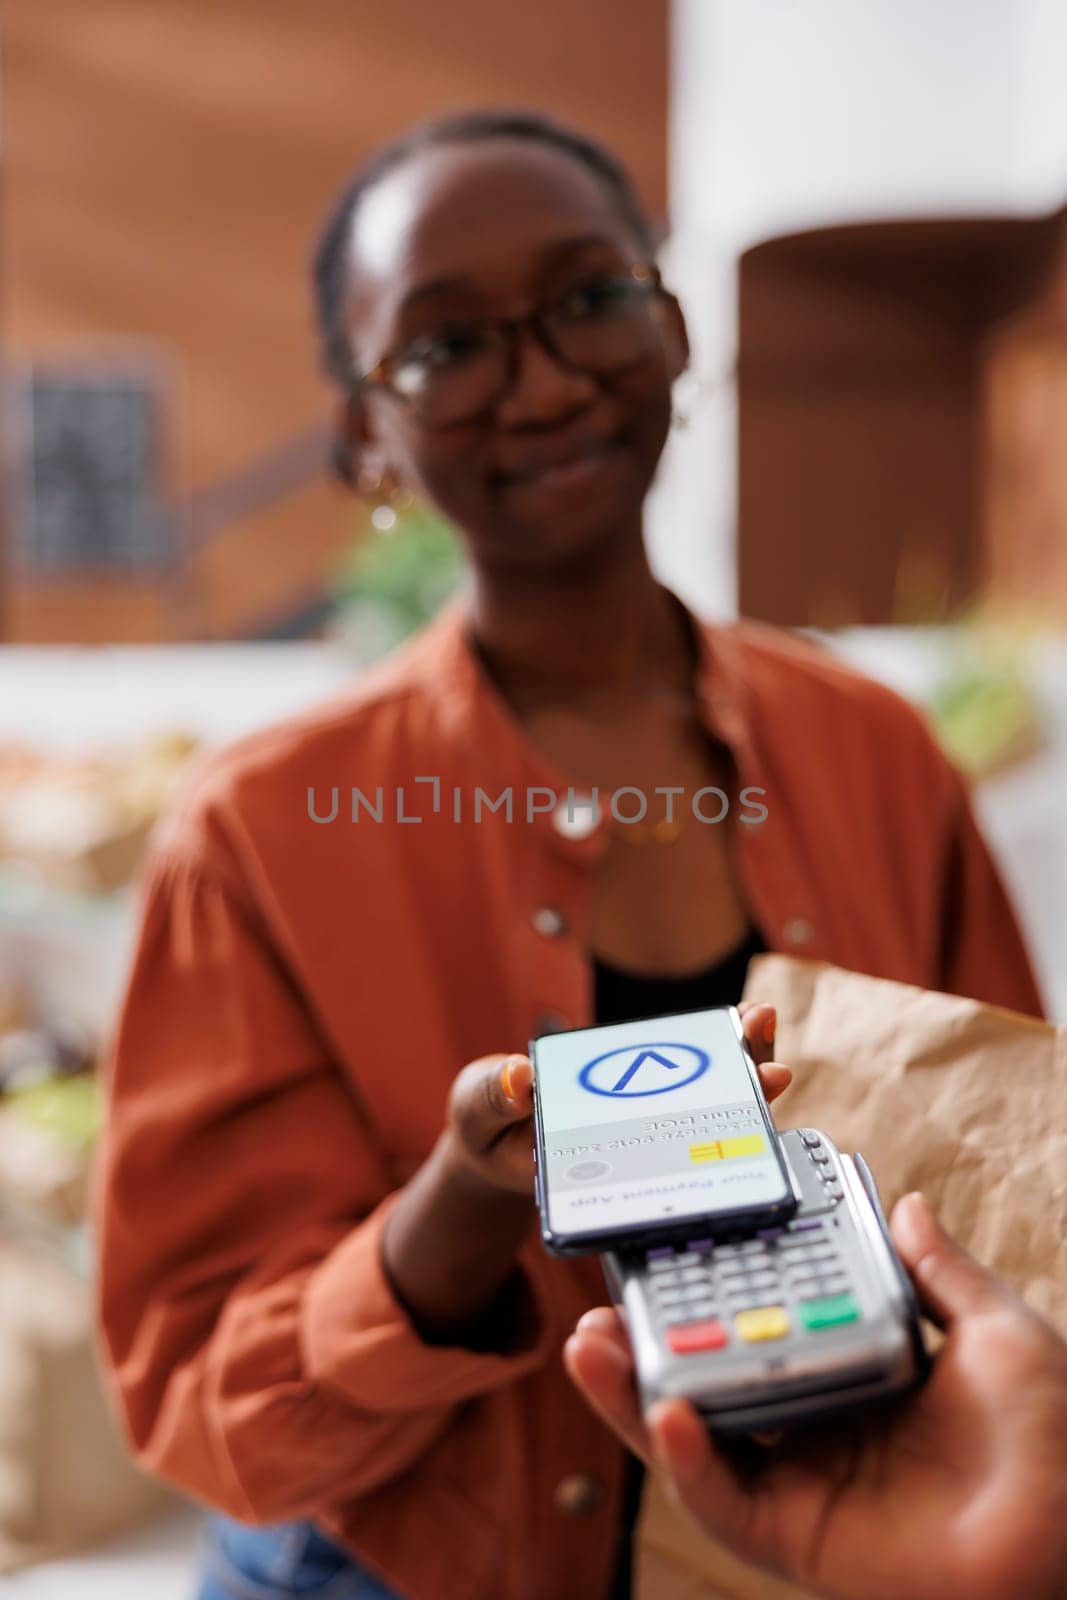 Detailed view of black individual grasping pos machine for female shopper to pay using her smartphone. Young customer utilizing her mobile device for nfc cashless payment at local grocery store.